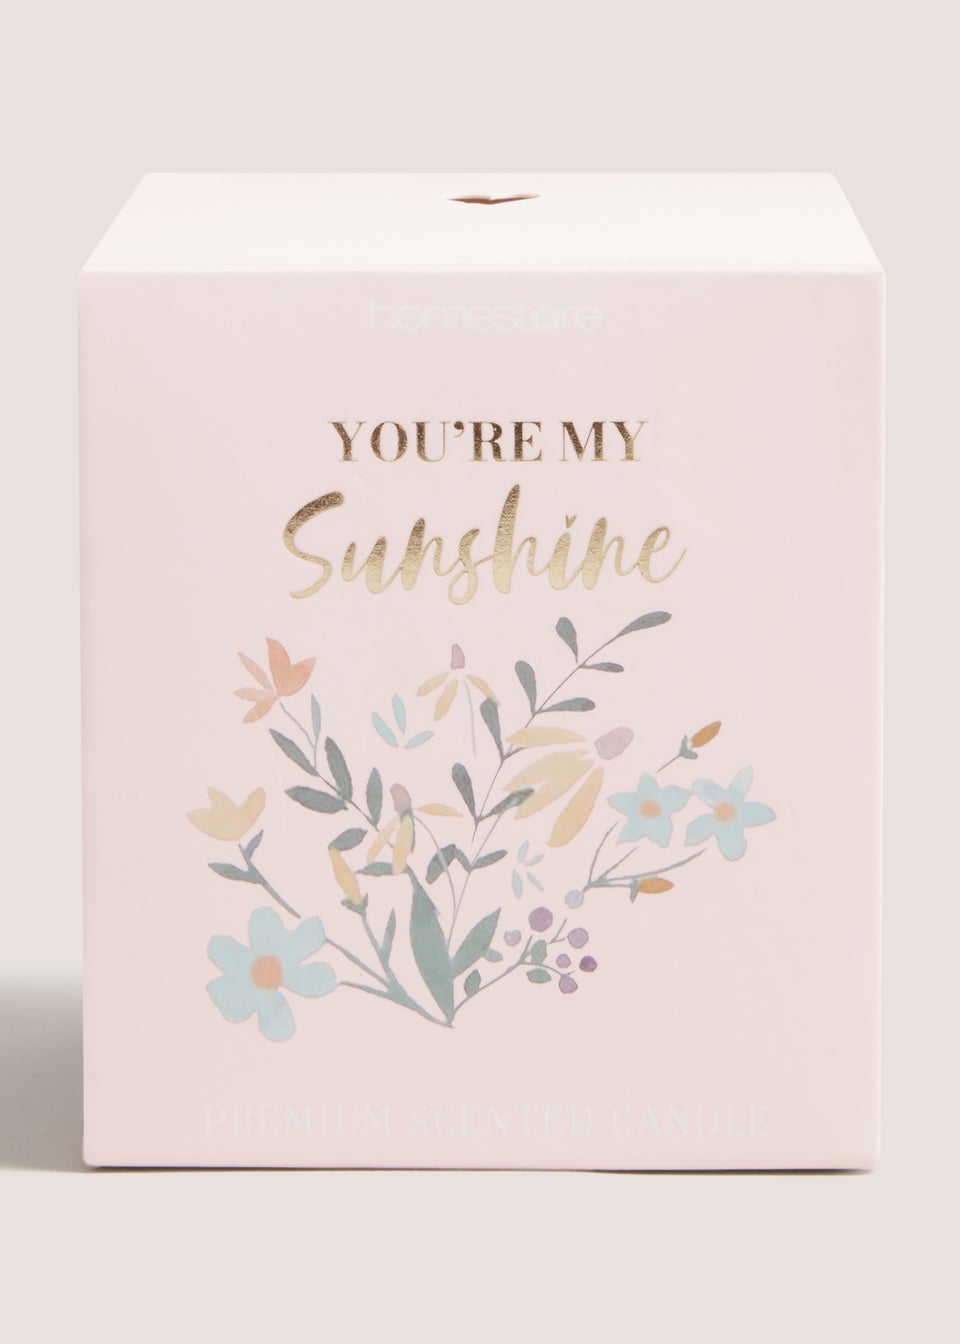 You're My Sunshine Candle (7.7x7.7x8.2CM)